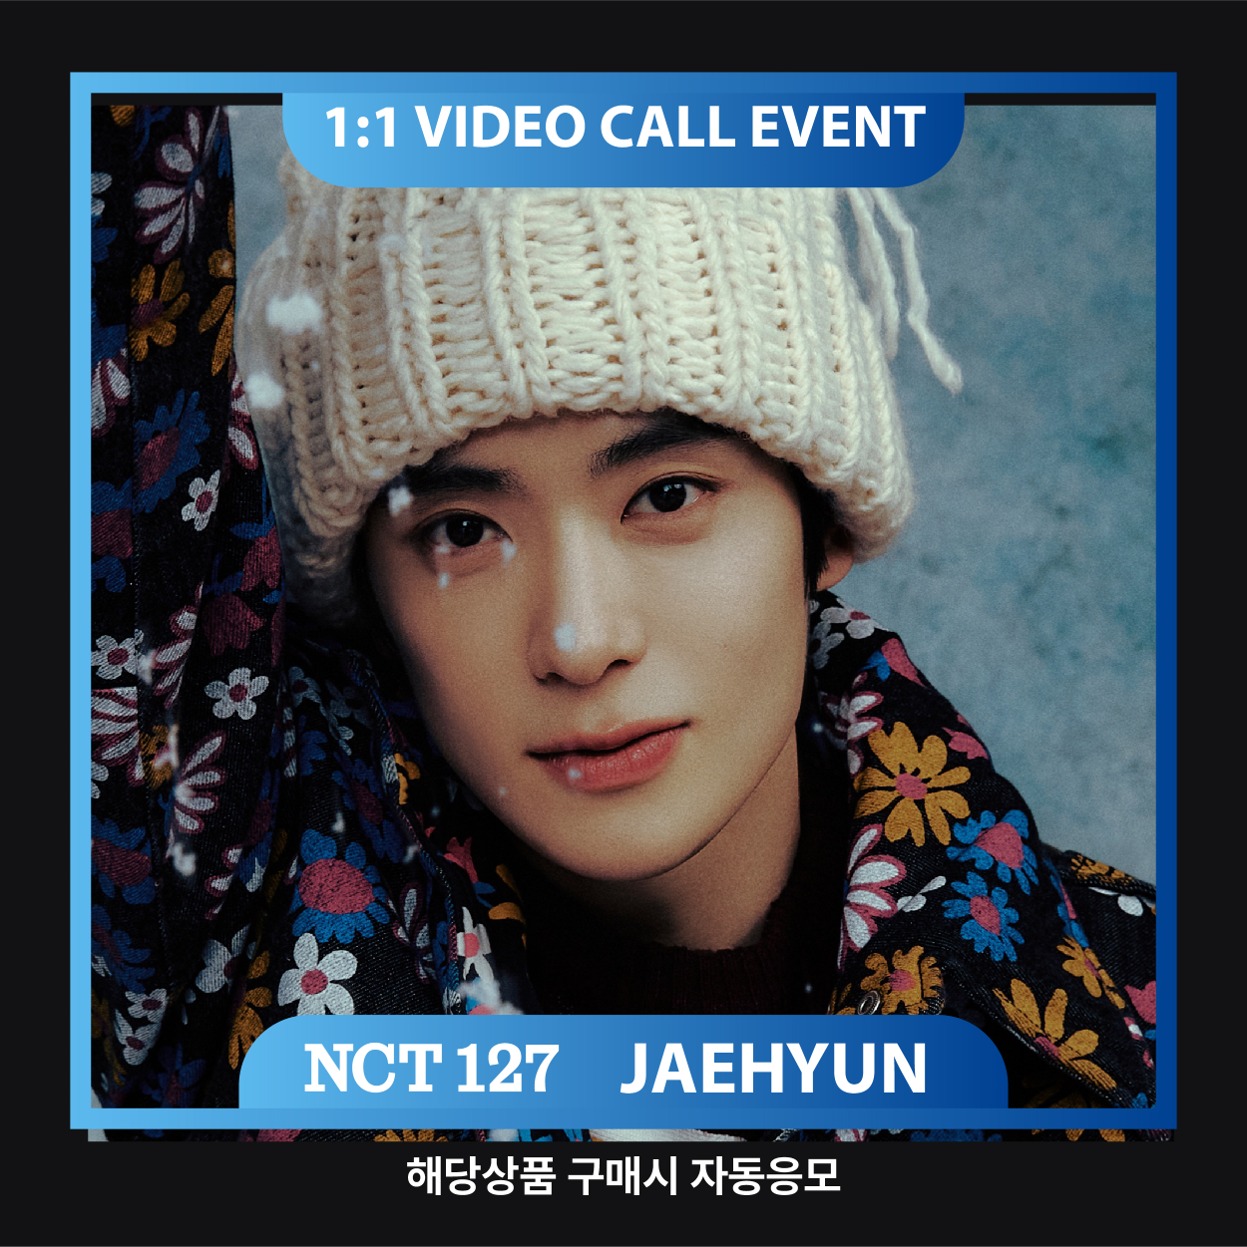 [JAEHYUN 1/25 VIDEO CALL EVENT] NCT 127 (NCT 127) - 冬のスペシャルシングルアルバム [Be There For Me] (HOUSE Ver.)